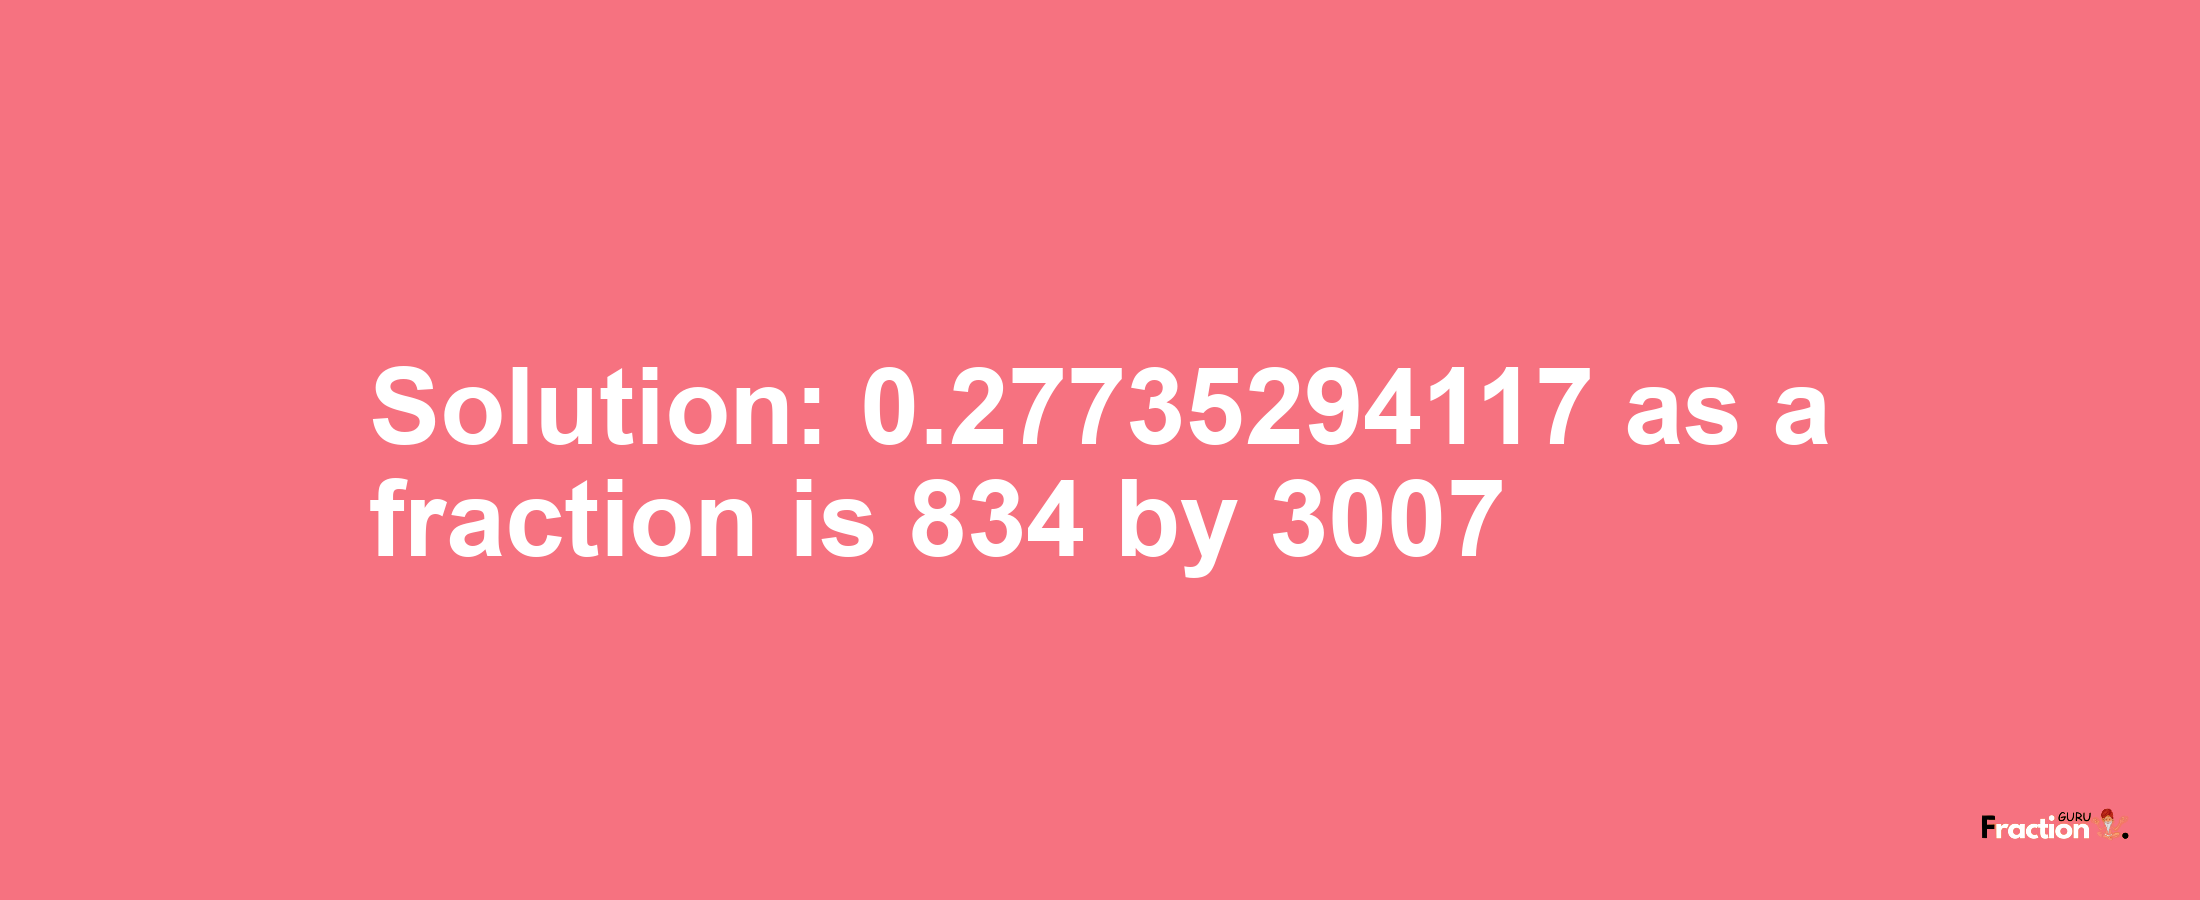 Solution:0.27735294117 as a fraction is 834/3007